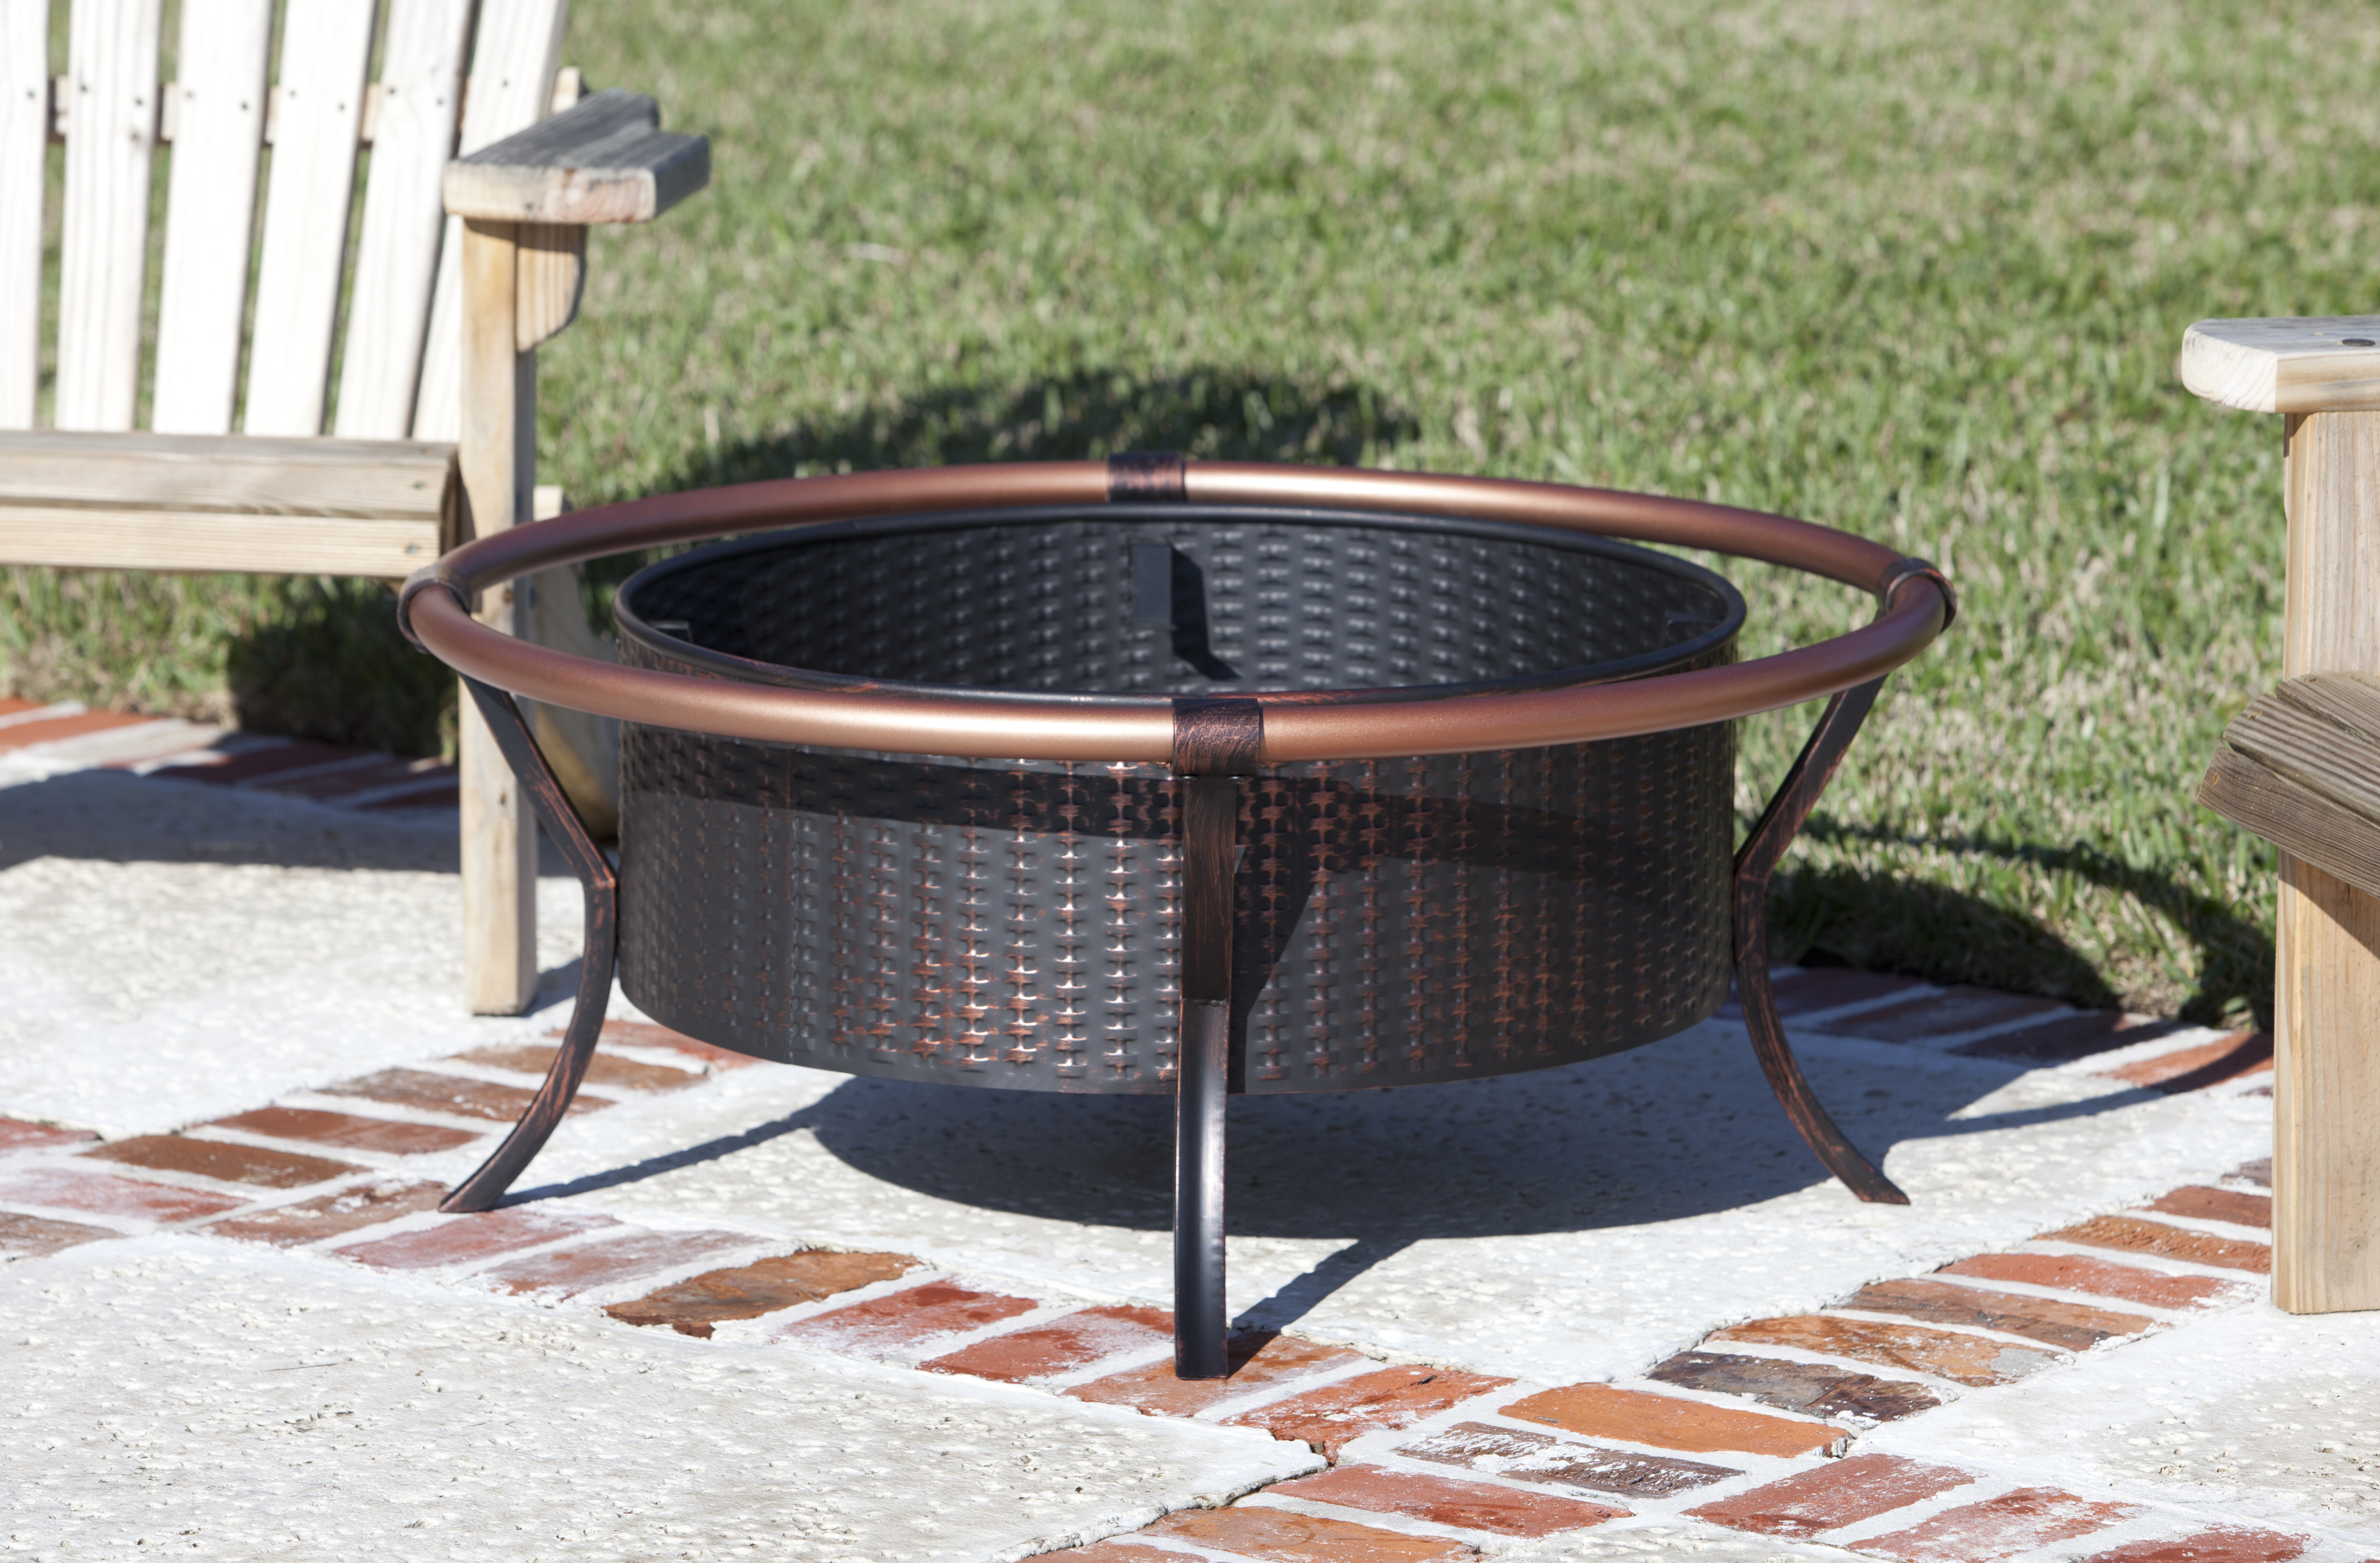 Fire pits at buc ees - 🧡 Cast Stone Wood Fire Pit Yard and landscapin...